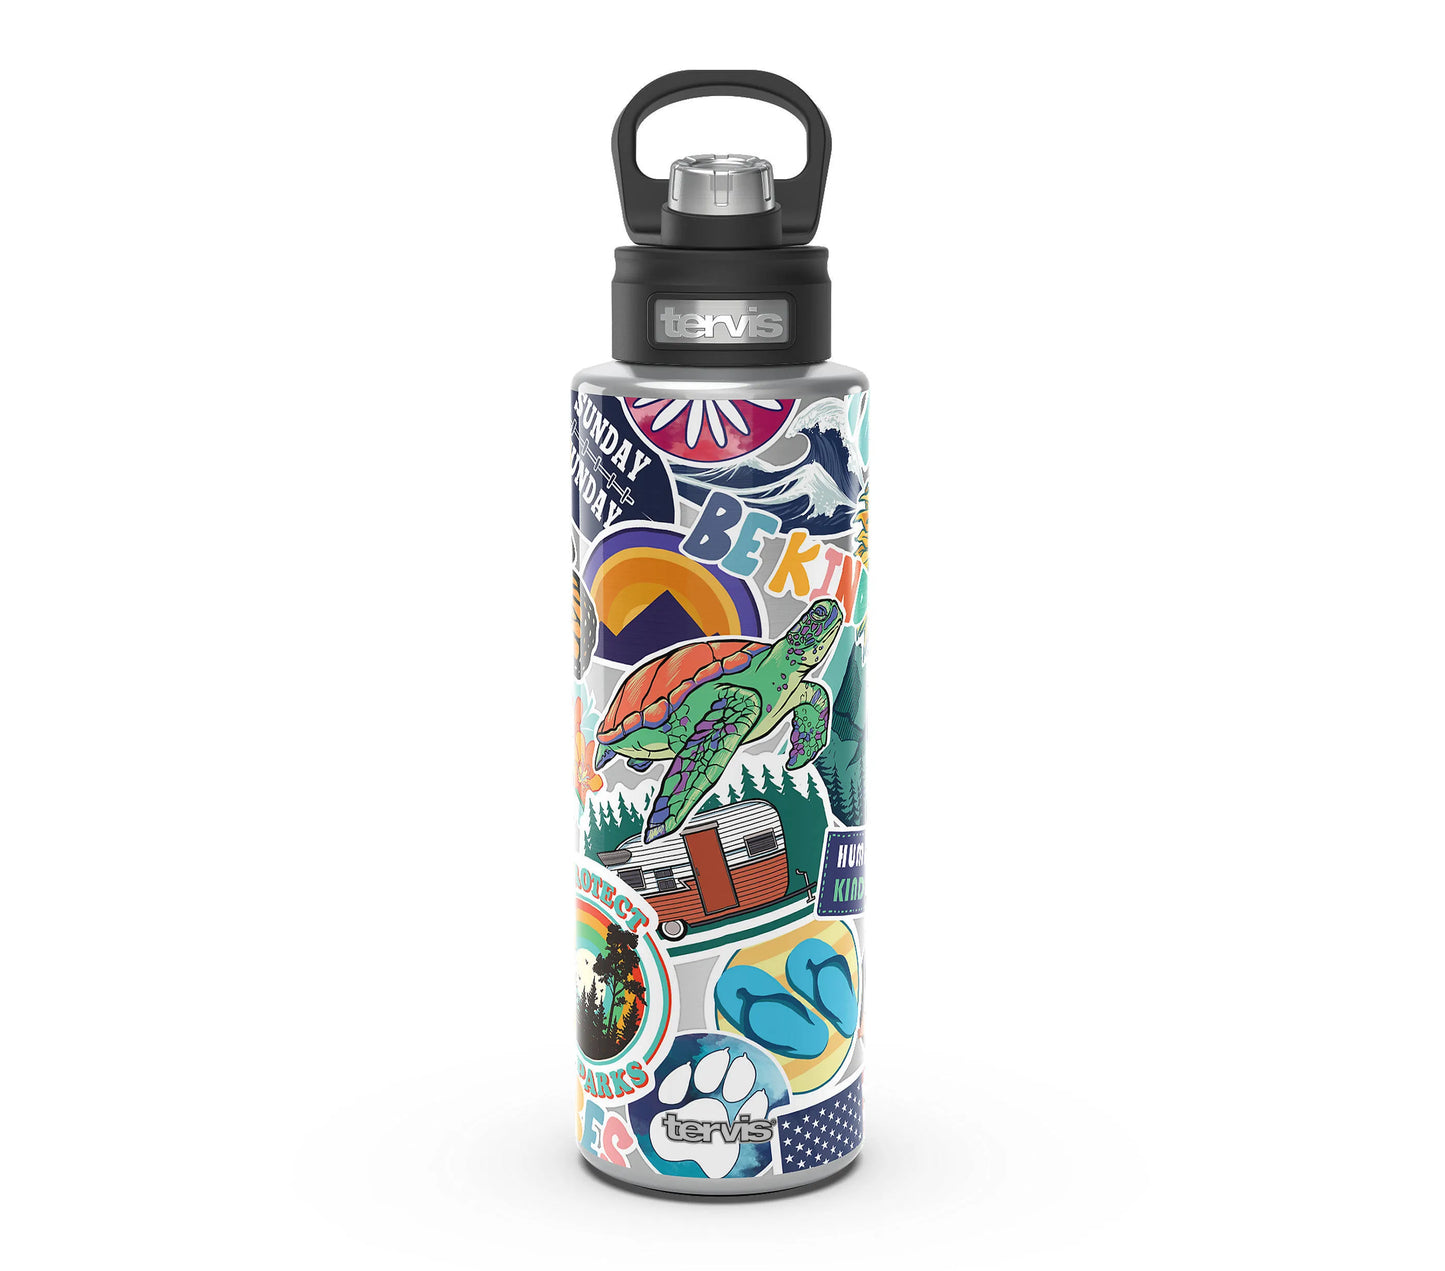 Tervis - Sticker Collage Stainless Steel Wide Mouth Bottle with Deluxe Spout Lid 40oz